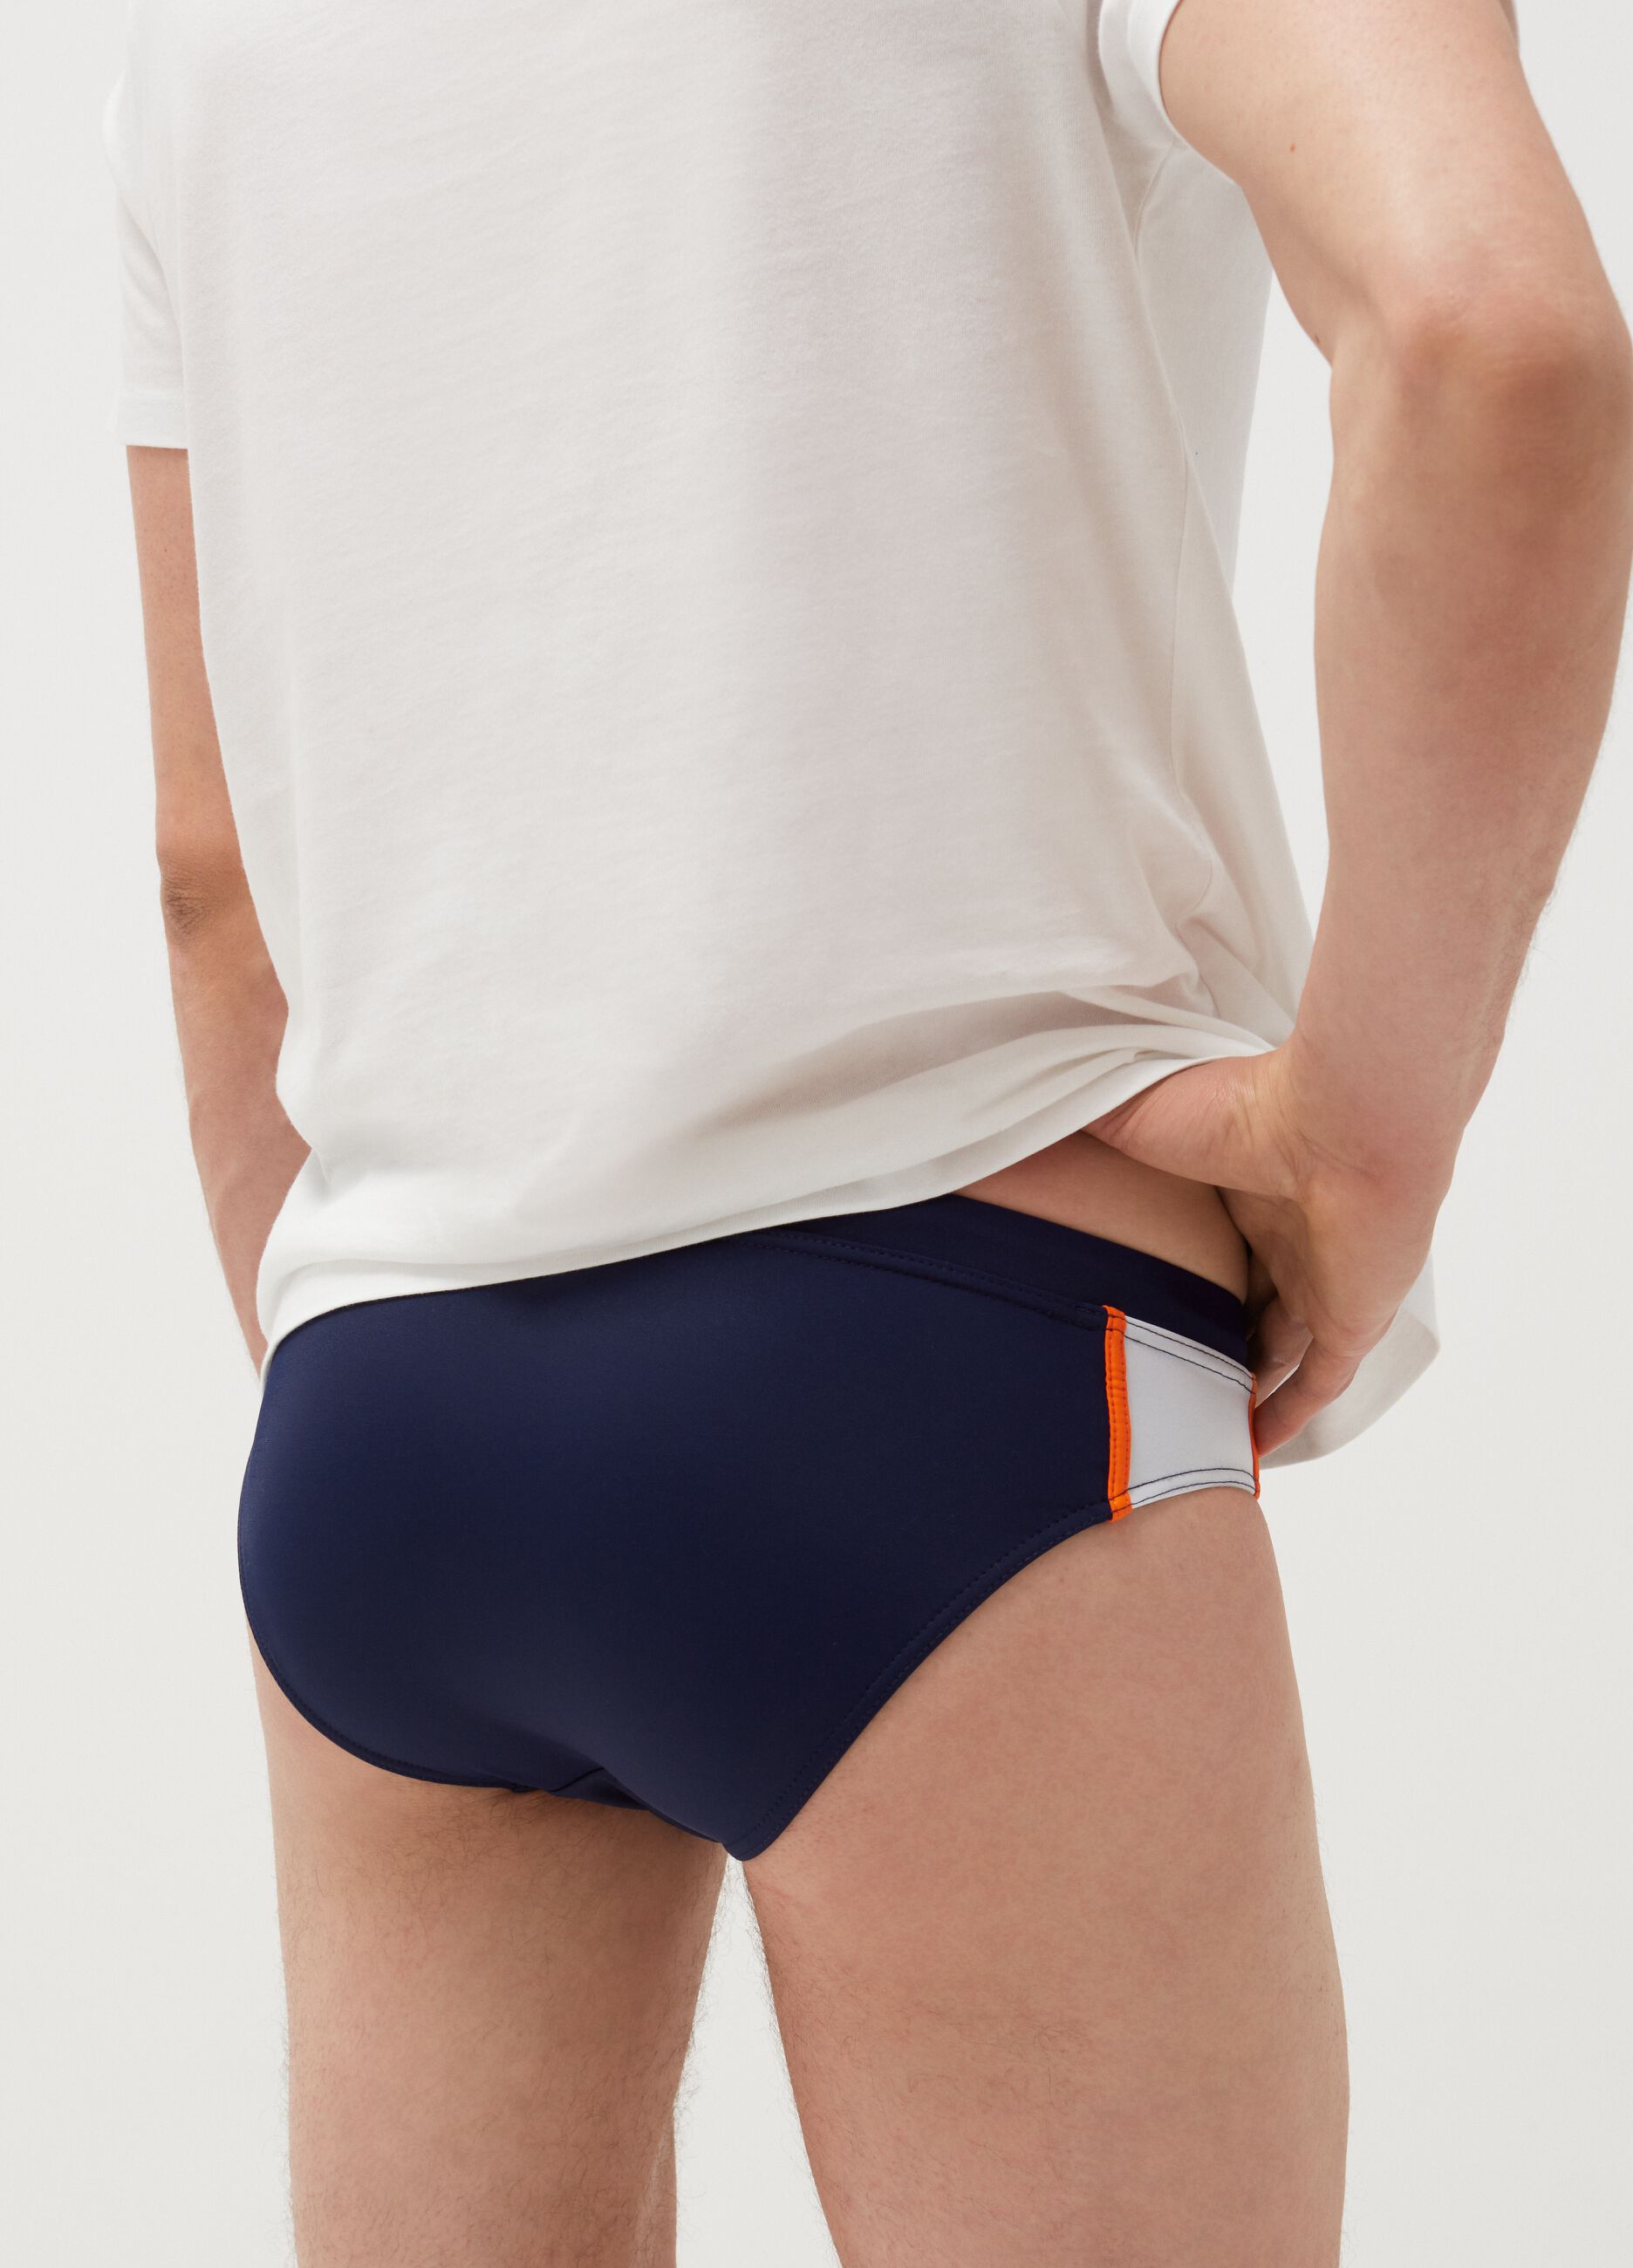 Maui and Sons swim briefs with drawstring